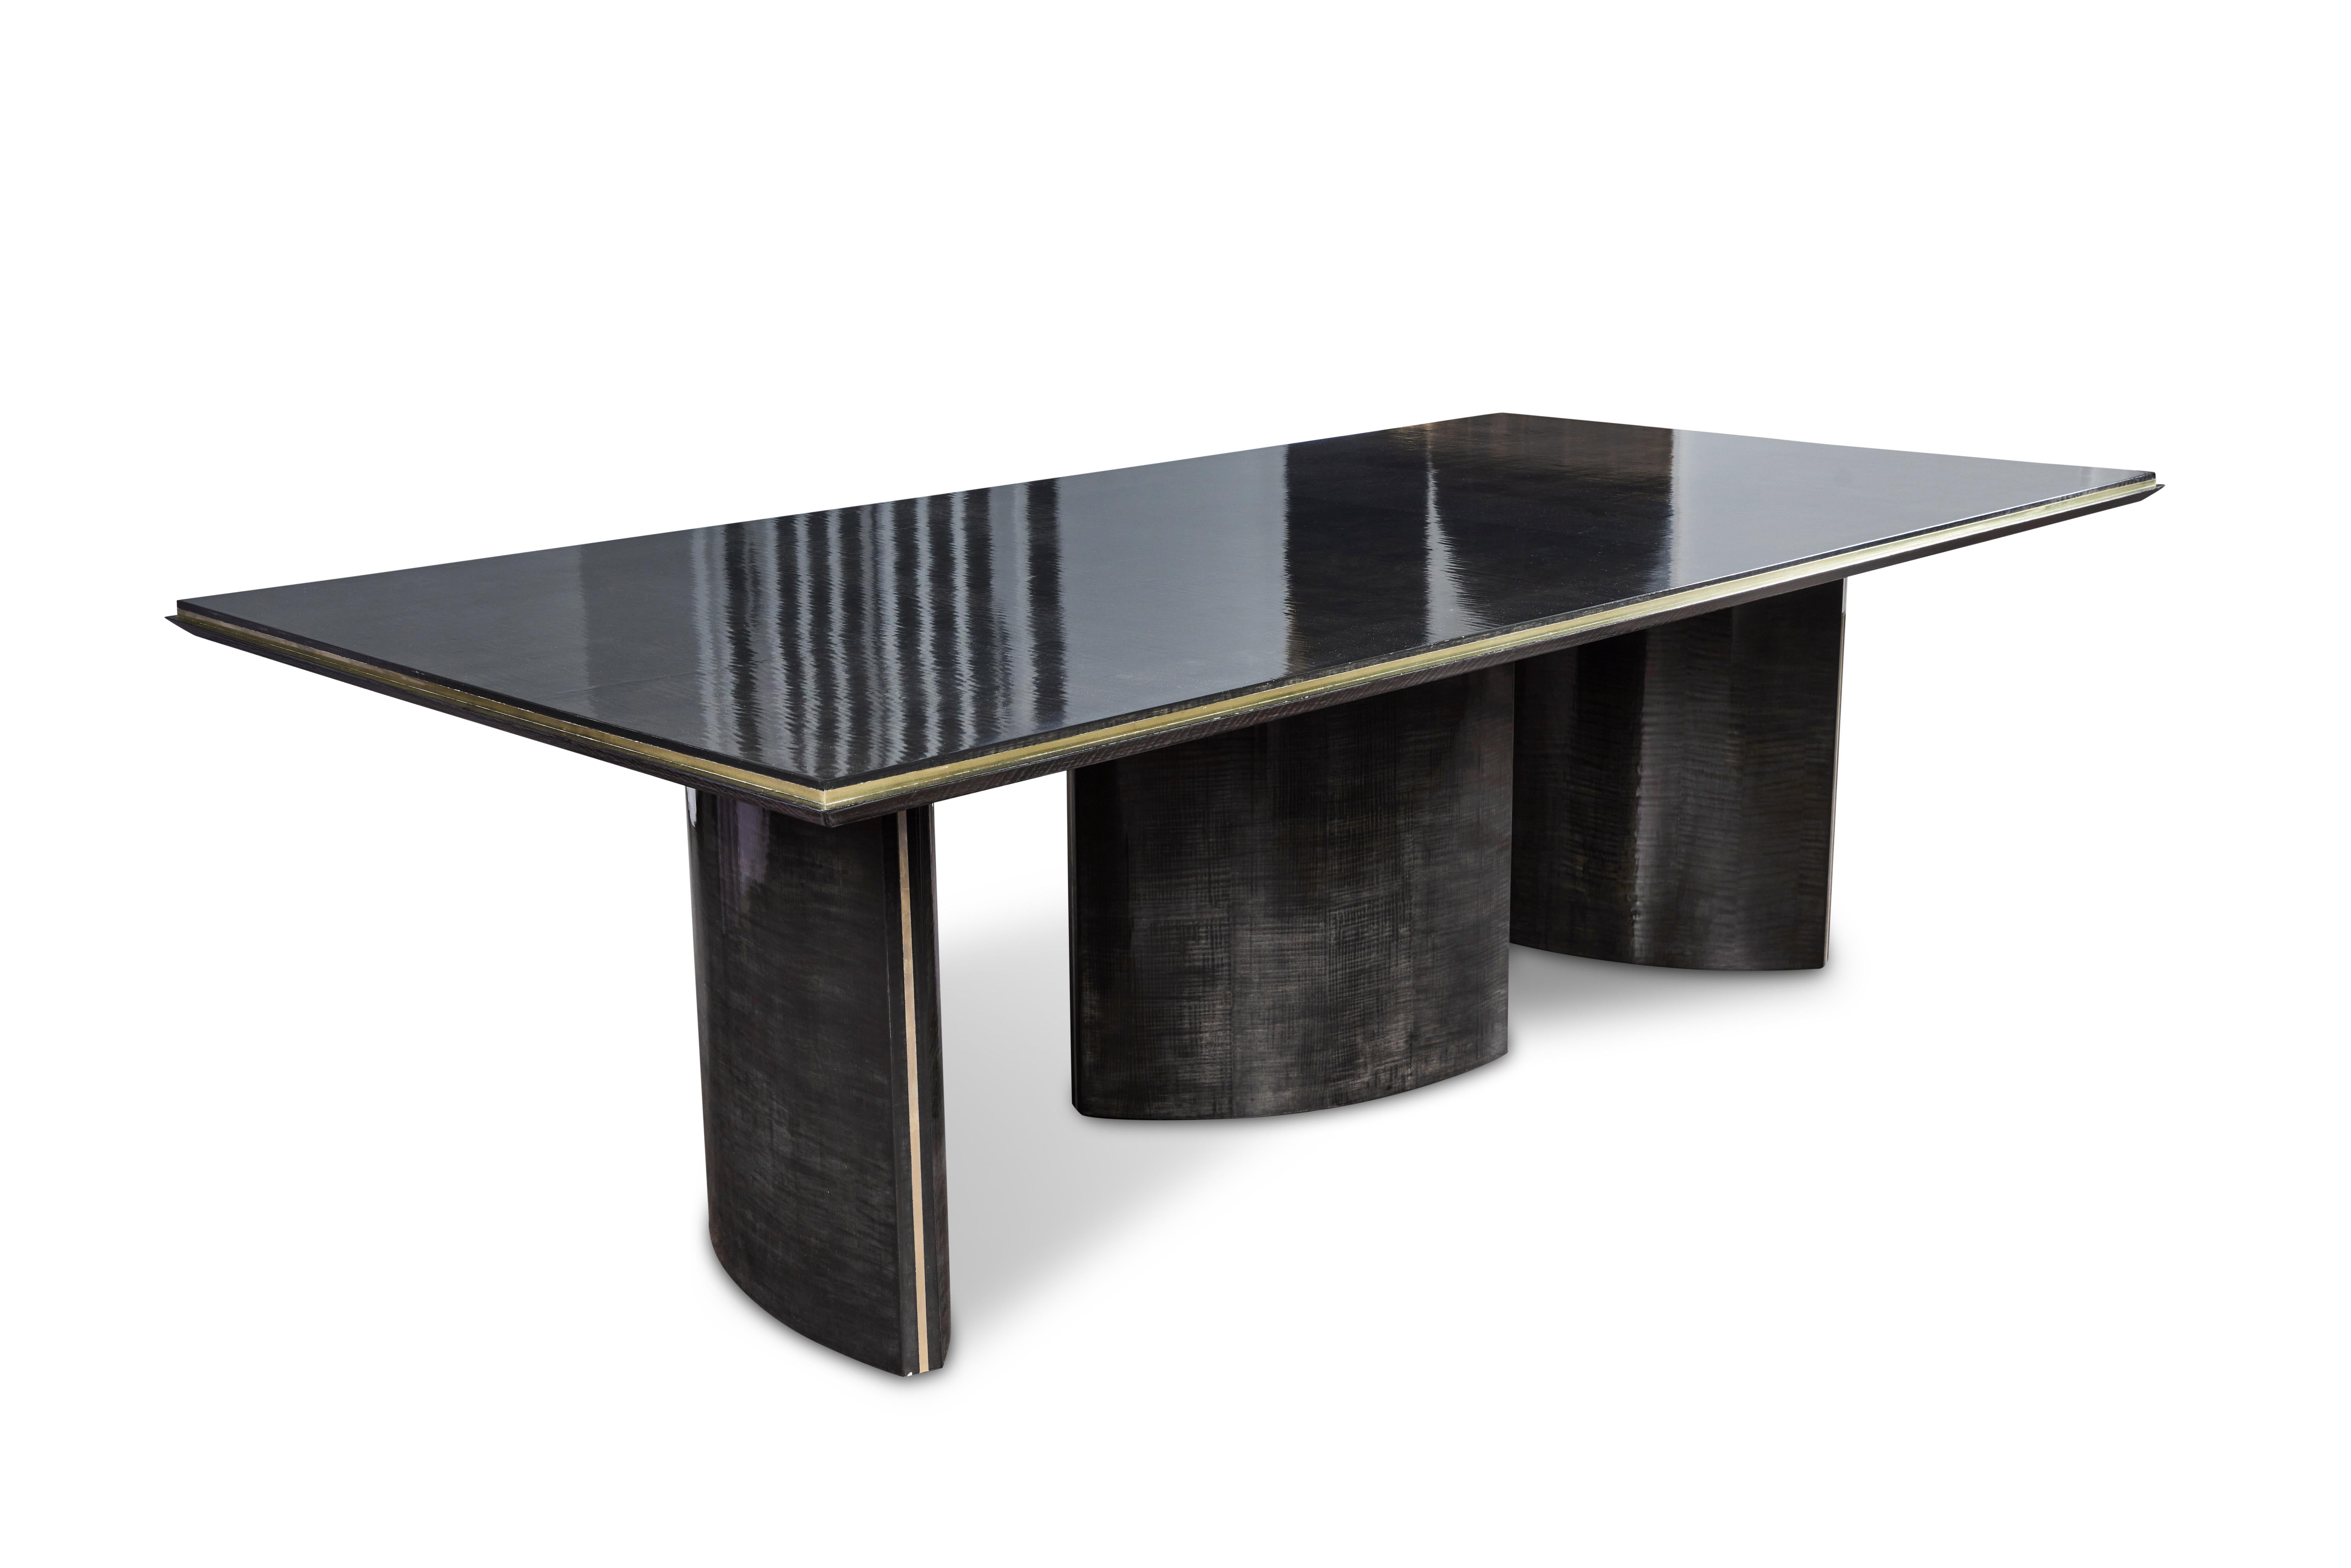 Chic and elegant dining table mad of lacquered sycamore with brass metal detailing. Table features three ovoid bases with brass detailing on the sides, positioned at different angles, supporting the table top with brass detailing all around the